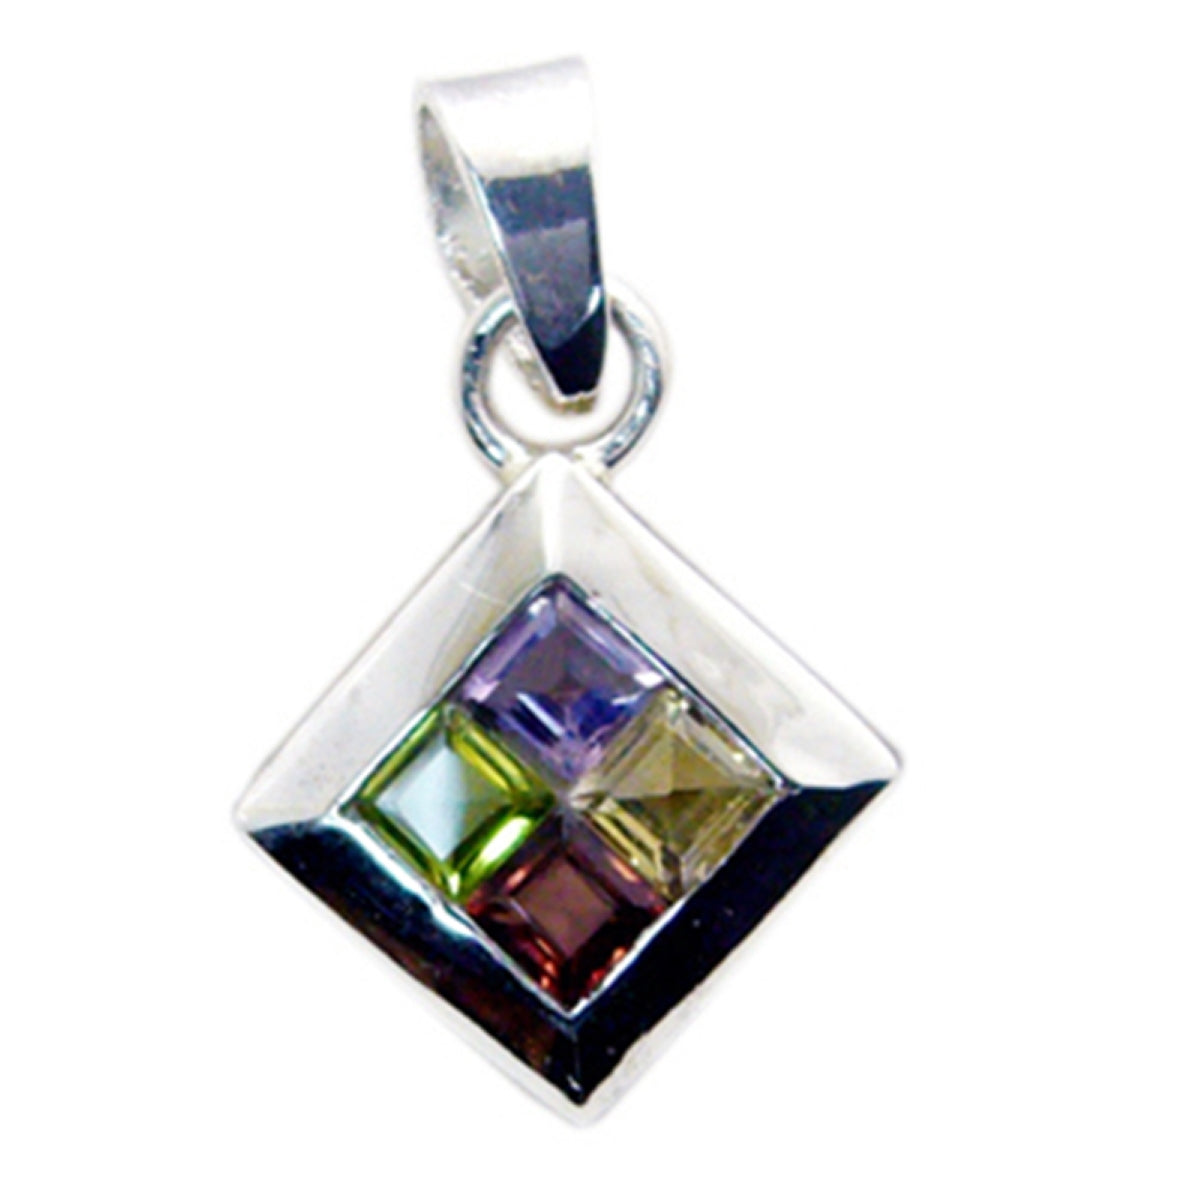 Riyo Tasty Gems Square Faceted Multi Color Multi Stone Solid Silver Pendant Gift For Easter Sunday